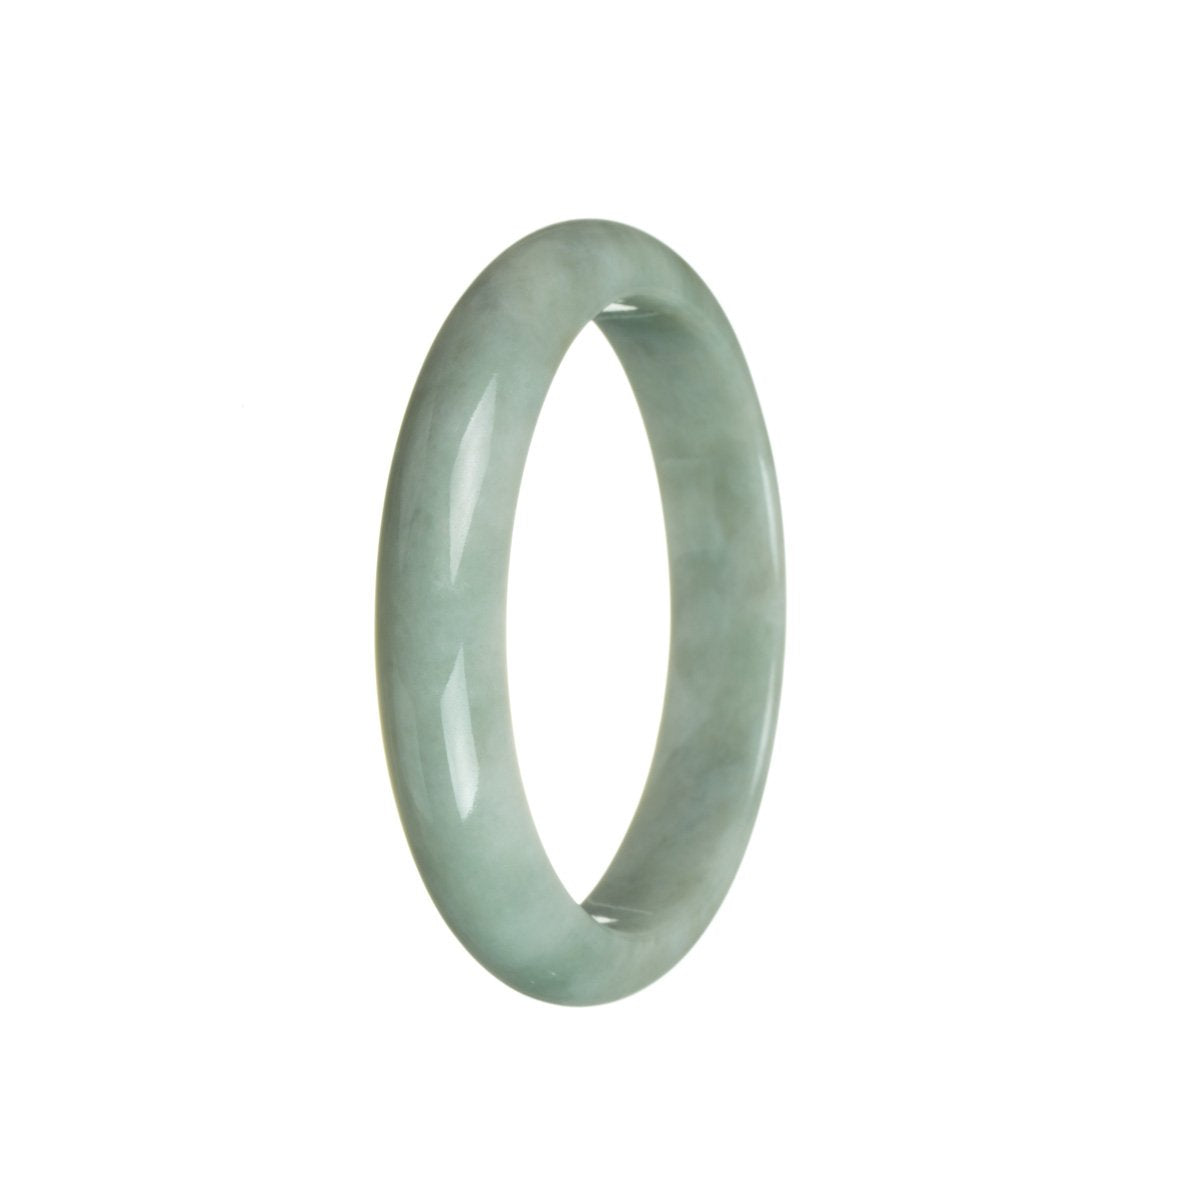 A close-up image of a green Burmese jade bracelet, featuring a half-moon shape. The bracelet is made of high-quality Grade A jade, certified for its authenticity. It is a beautiful piece of jewelry from MAYS GEMS.